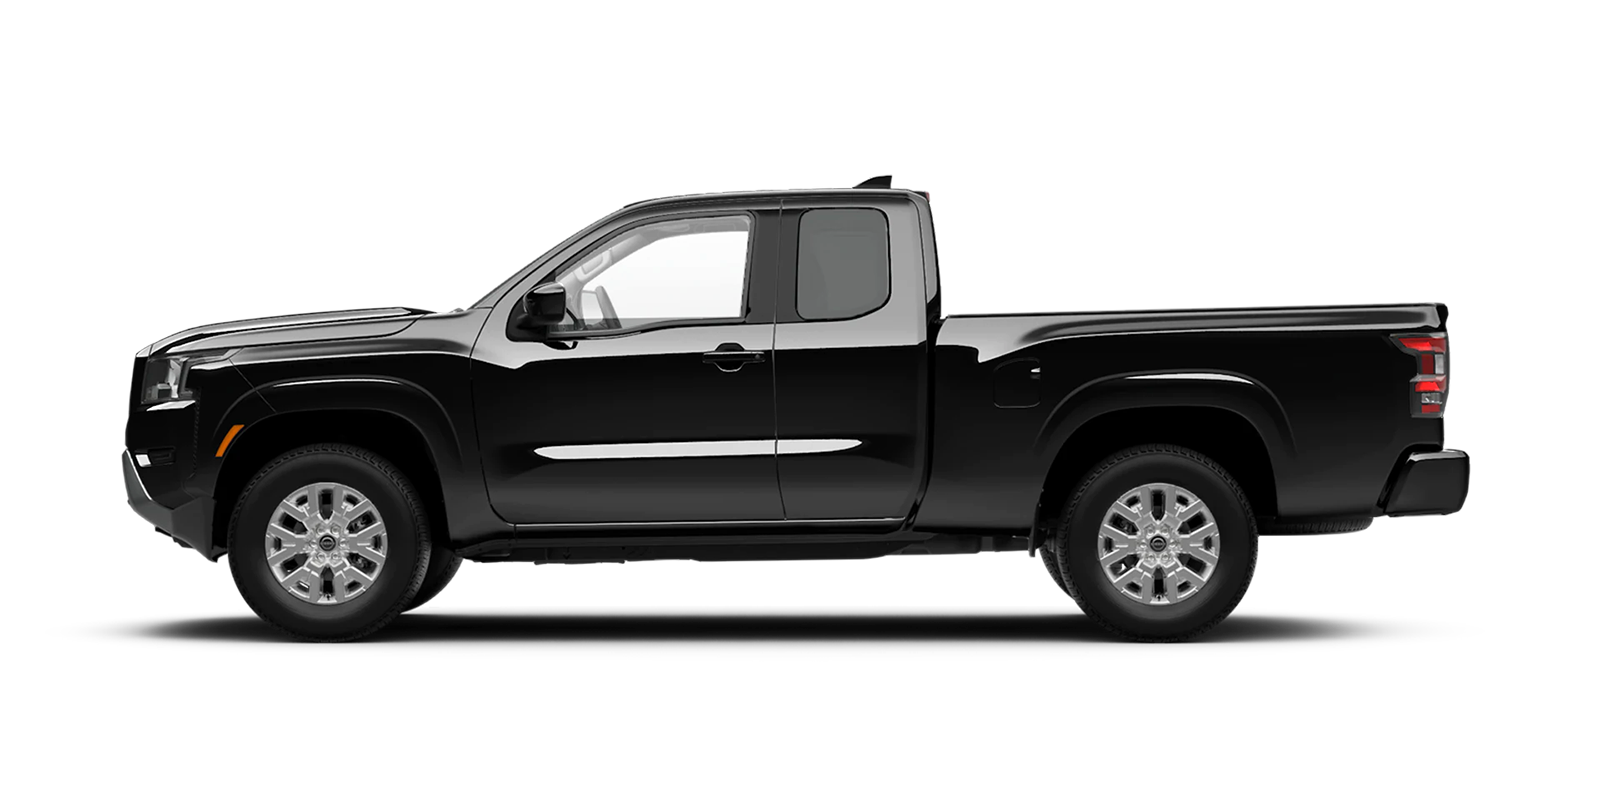 2022 Frontier King Cab SV 4x4 in Super Black | Courtesy Nissan PA in Altoona PA